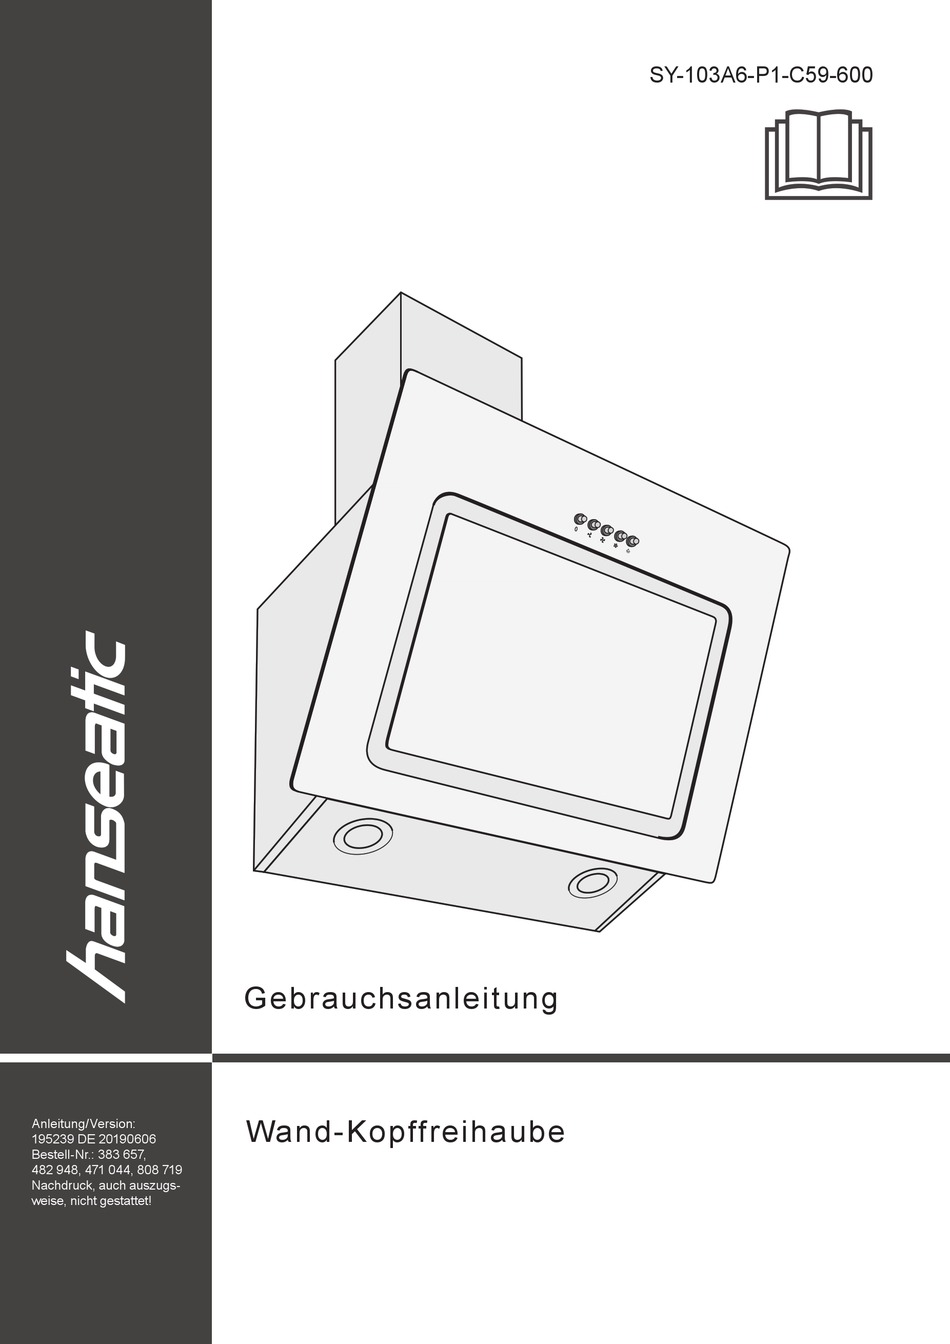 Final Steps Manual 43] ManualsLib [Page | SY-103A6-P1-C59-600 User Hanseatic 